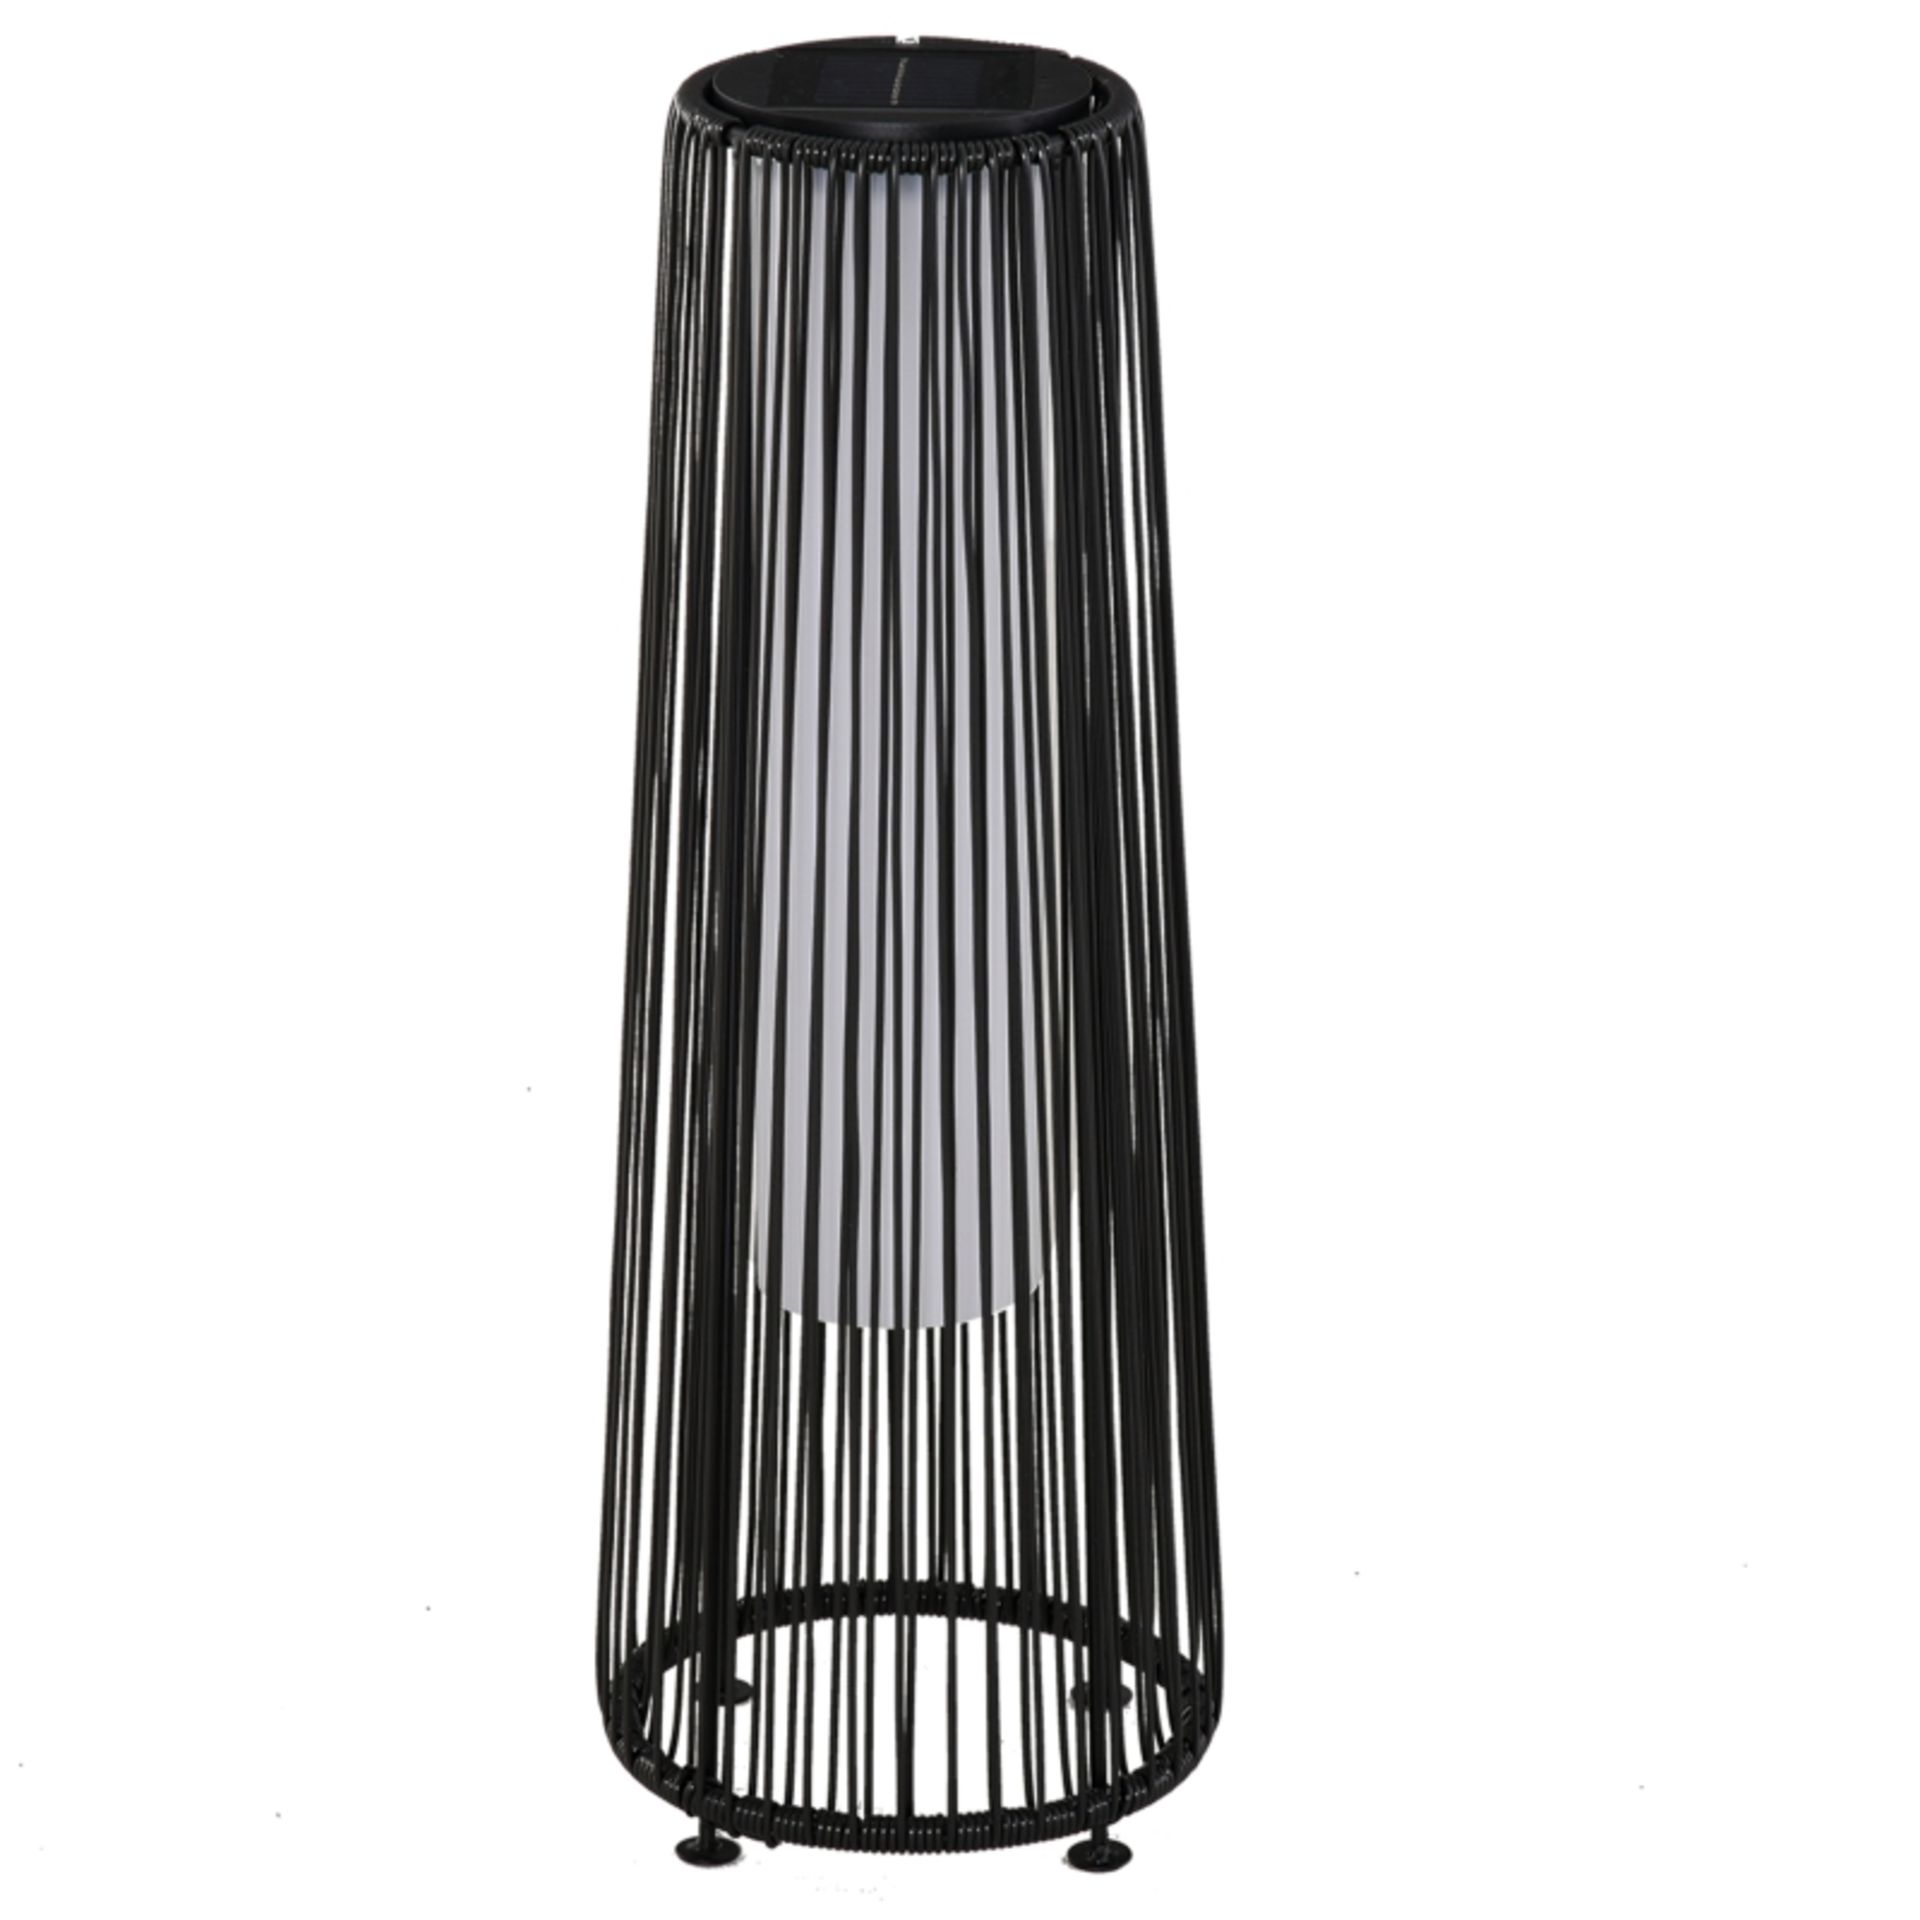 RPP £38.99 -Outsunny Patio Garden Solar Powered Lights Woven Resin Wicker Lantern Auto On/Off - Image 2 of 4